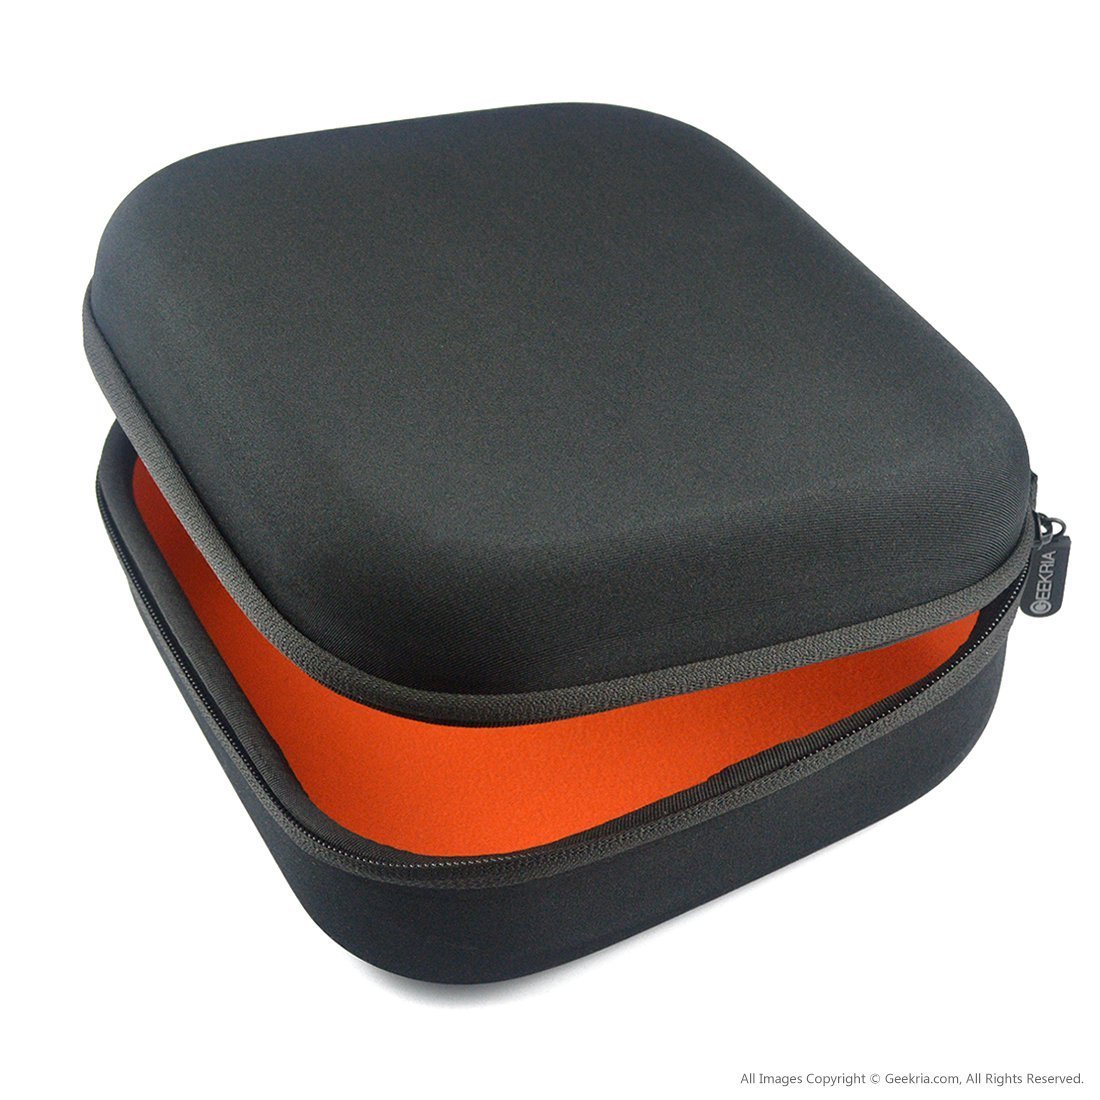 Geekria Hard Shell Headphone Case for Skullcandy and more